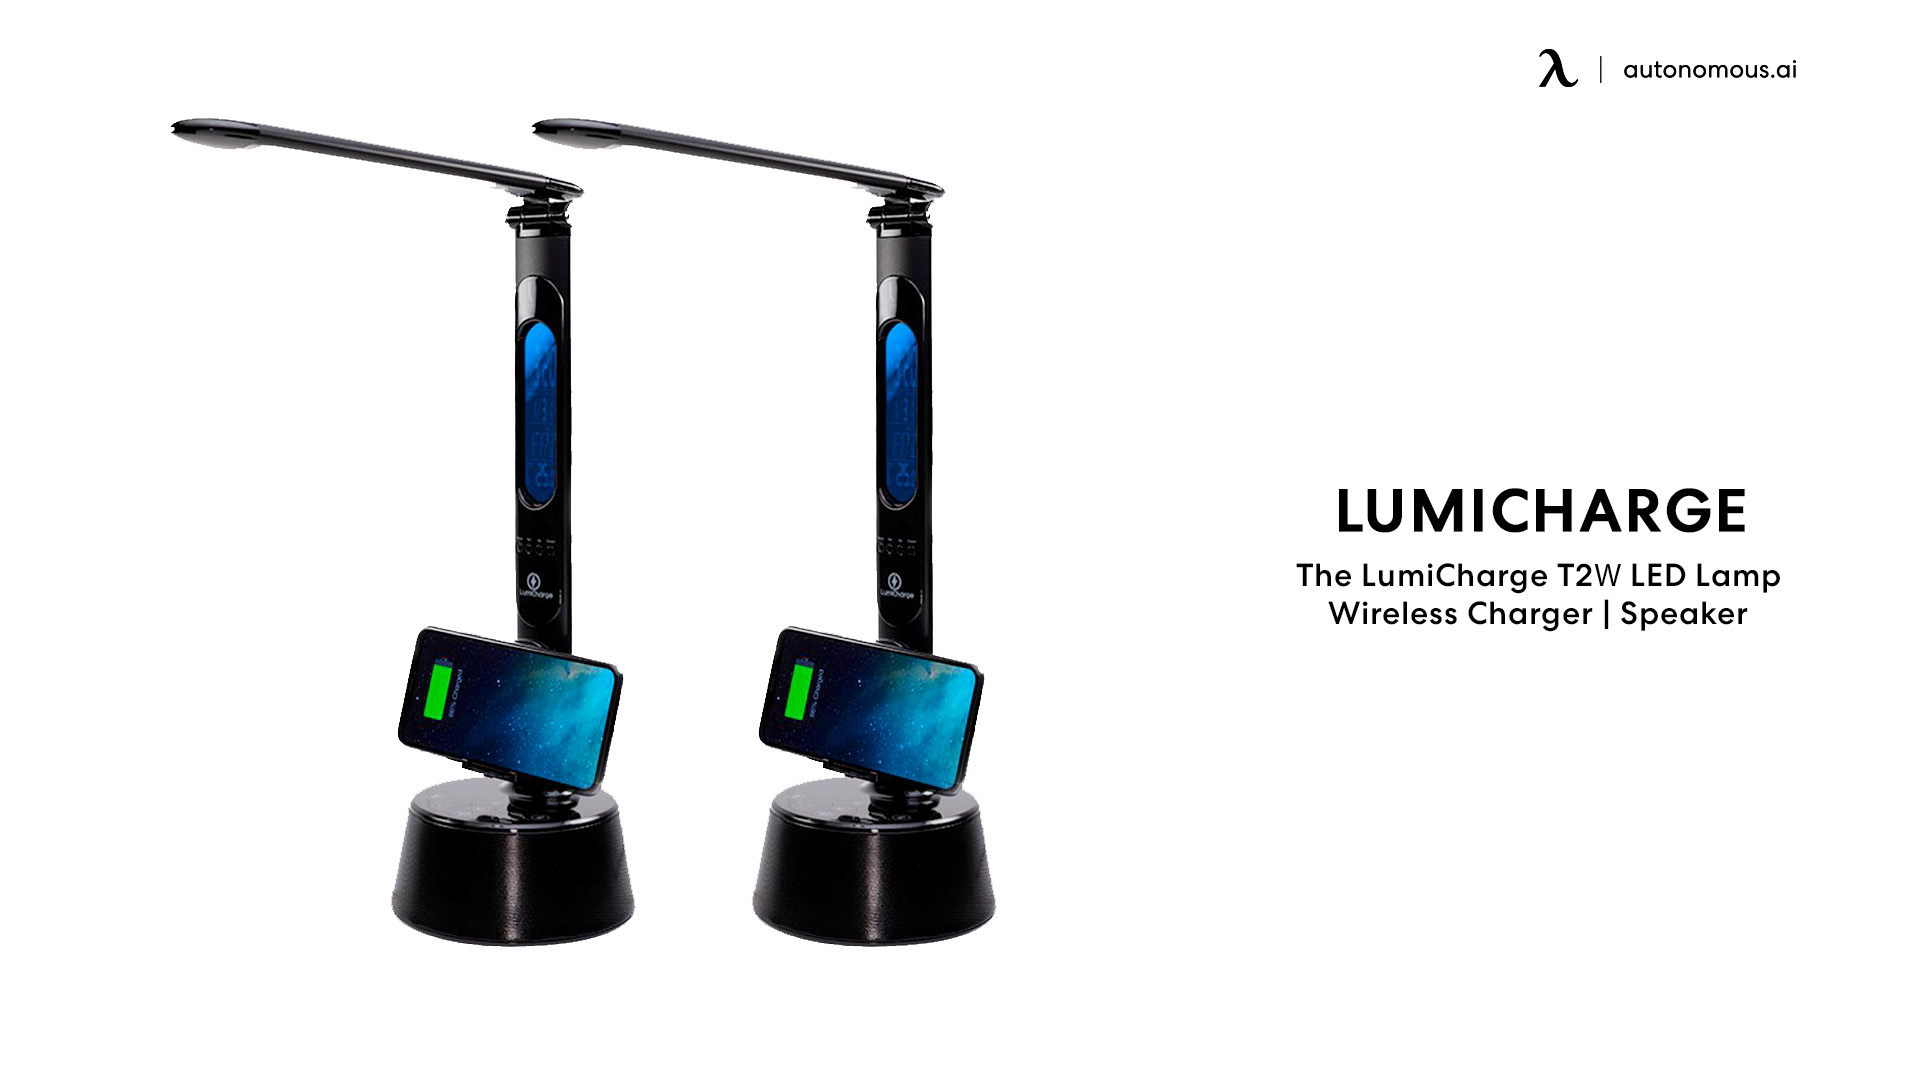 Lumicharge LED Light with Wireless Charger and Speaker